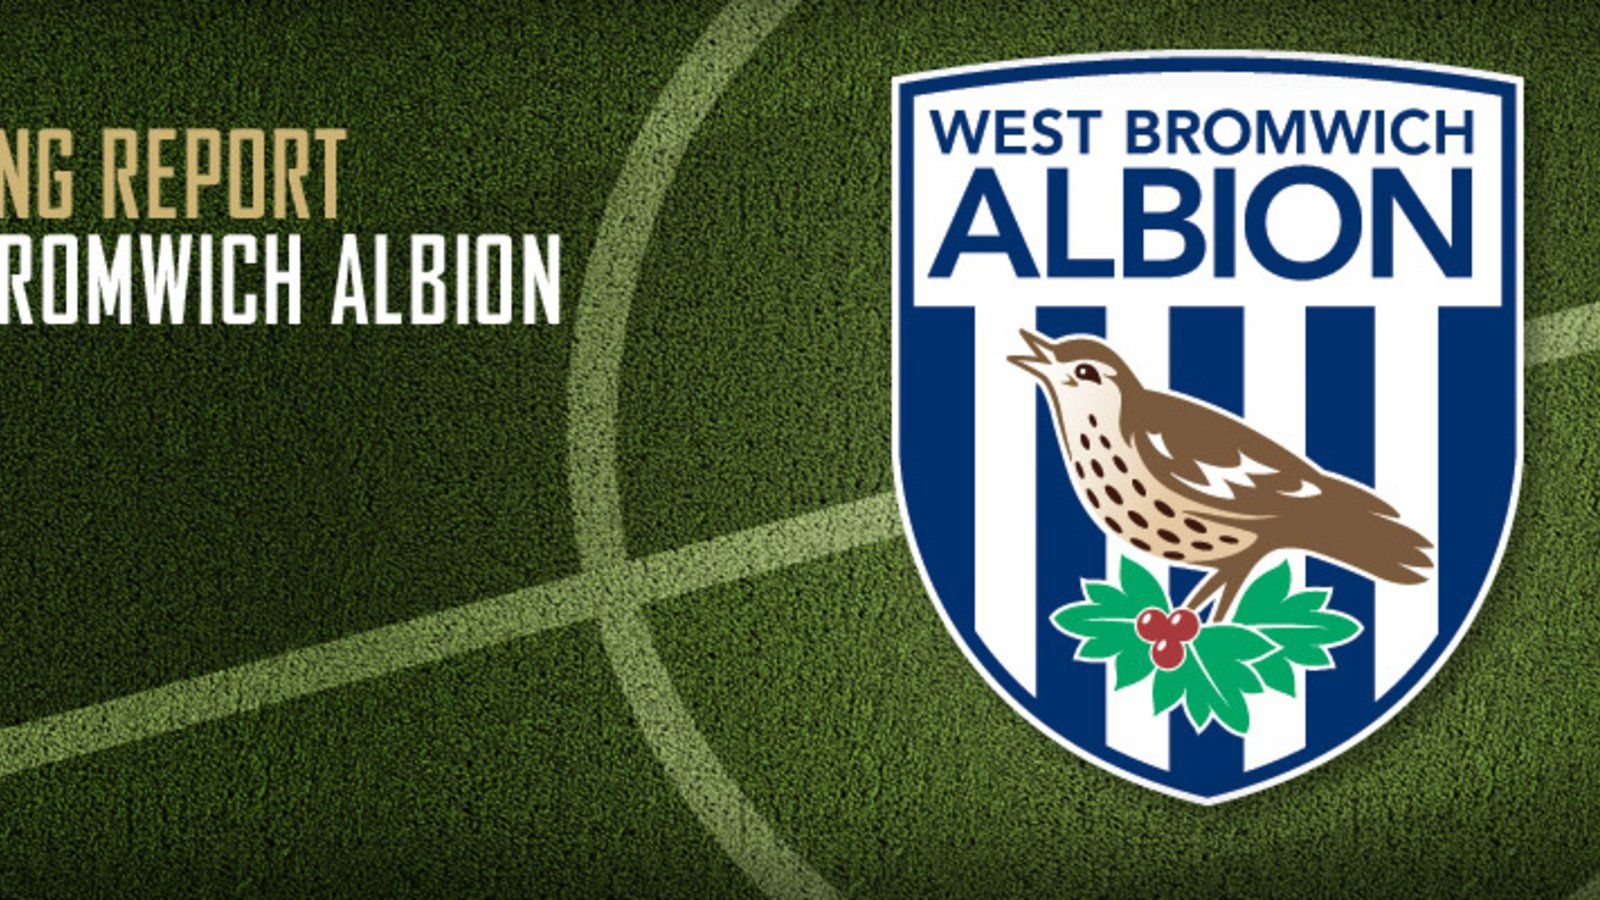 Smile Soccer Stars with the West Bromwich Albion Foundation